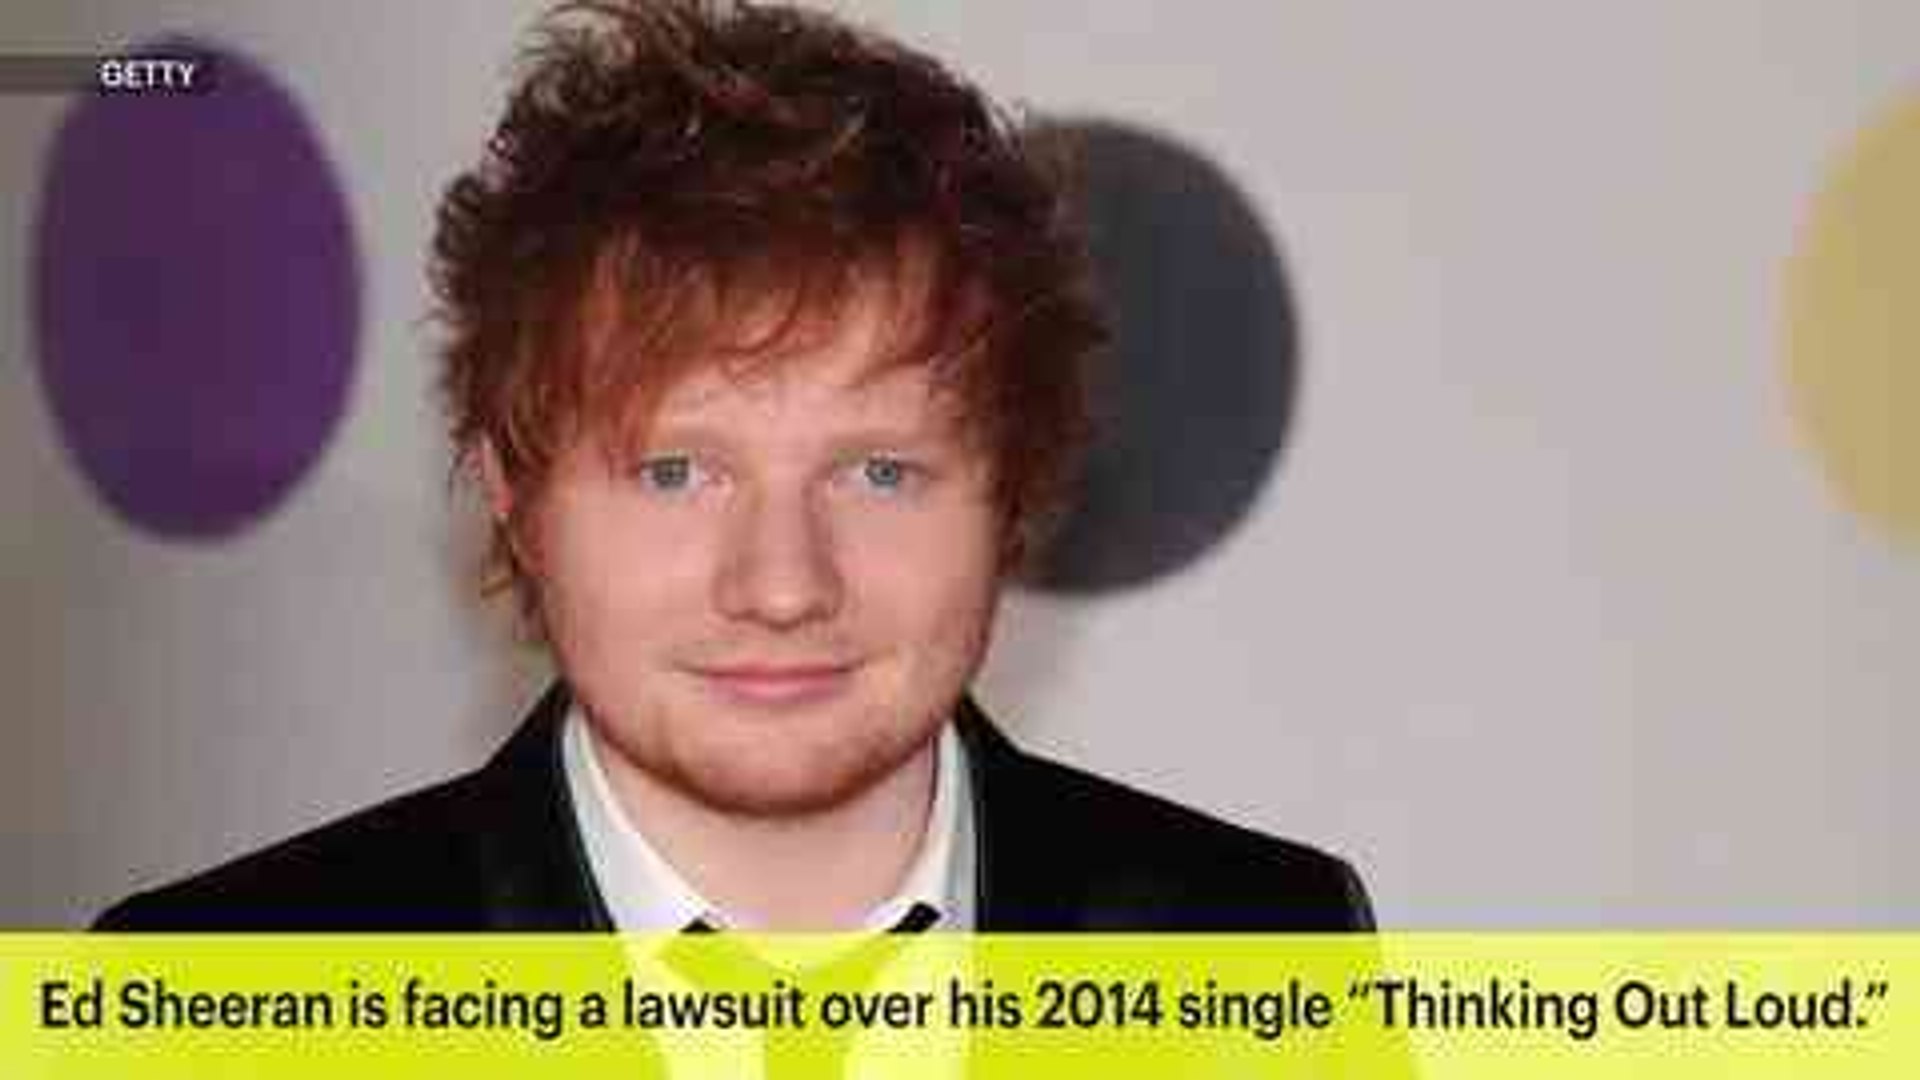 Ed Sheeran Sued for Alleged Copying